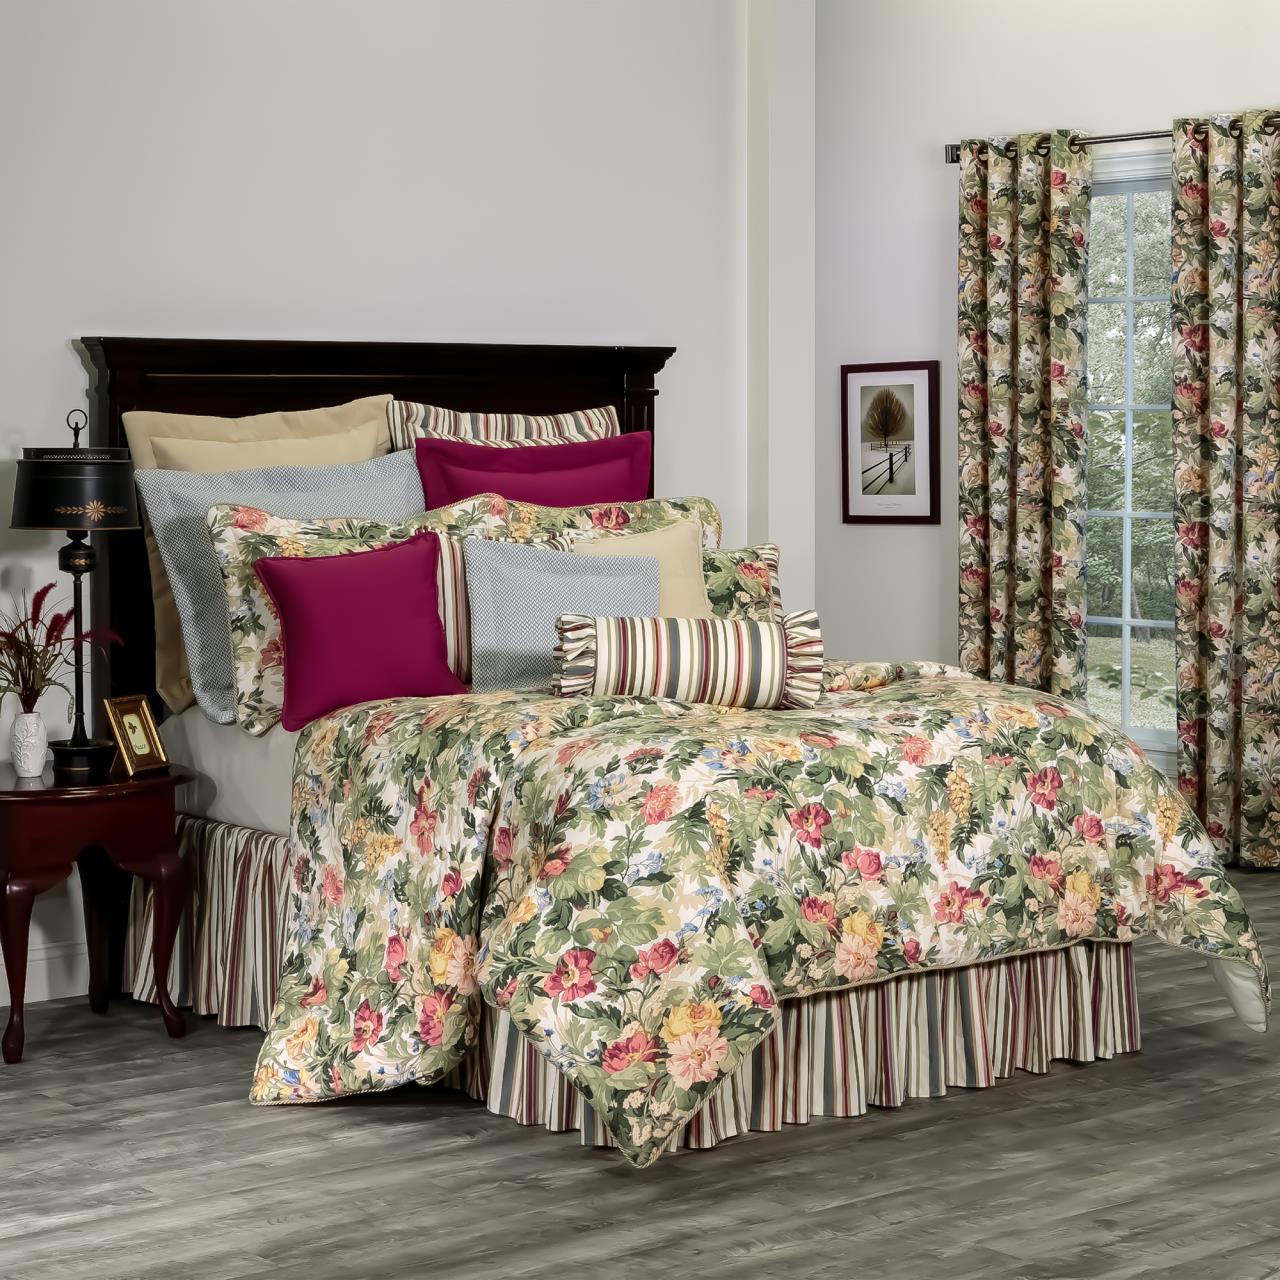 Virginia Bed Skirt by Thomasville | Paul's Home Fashions